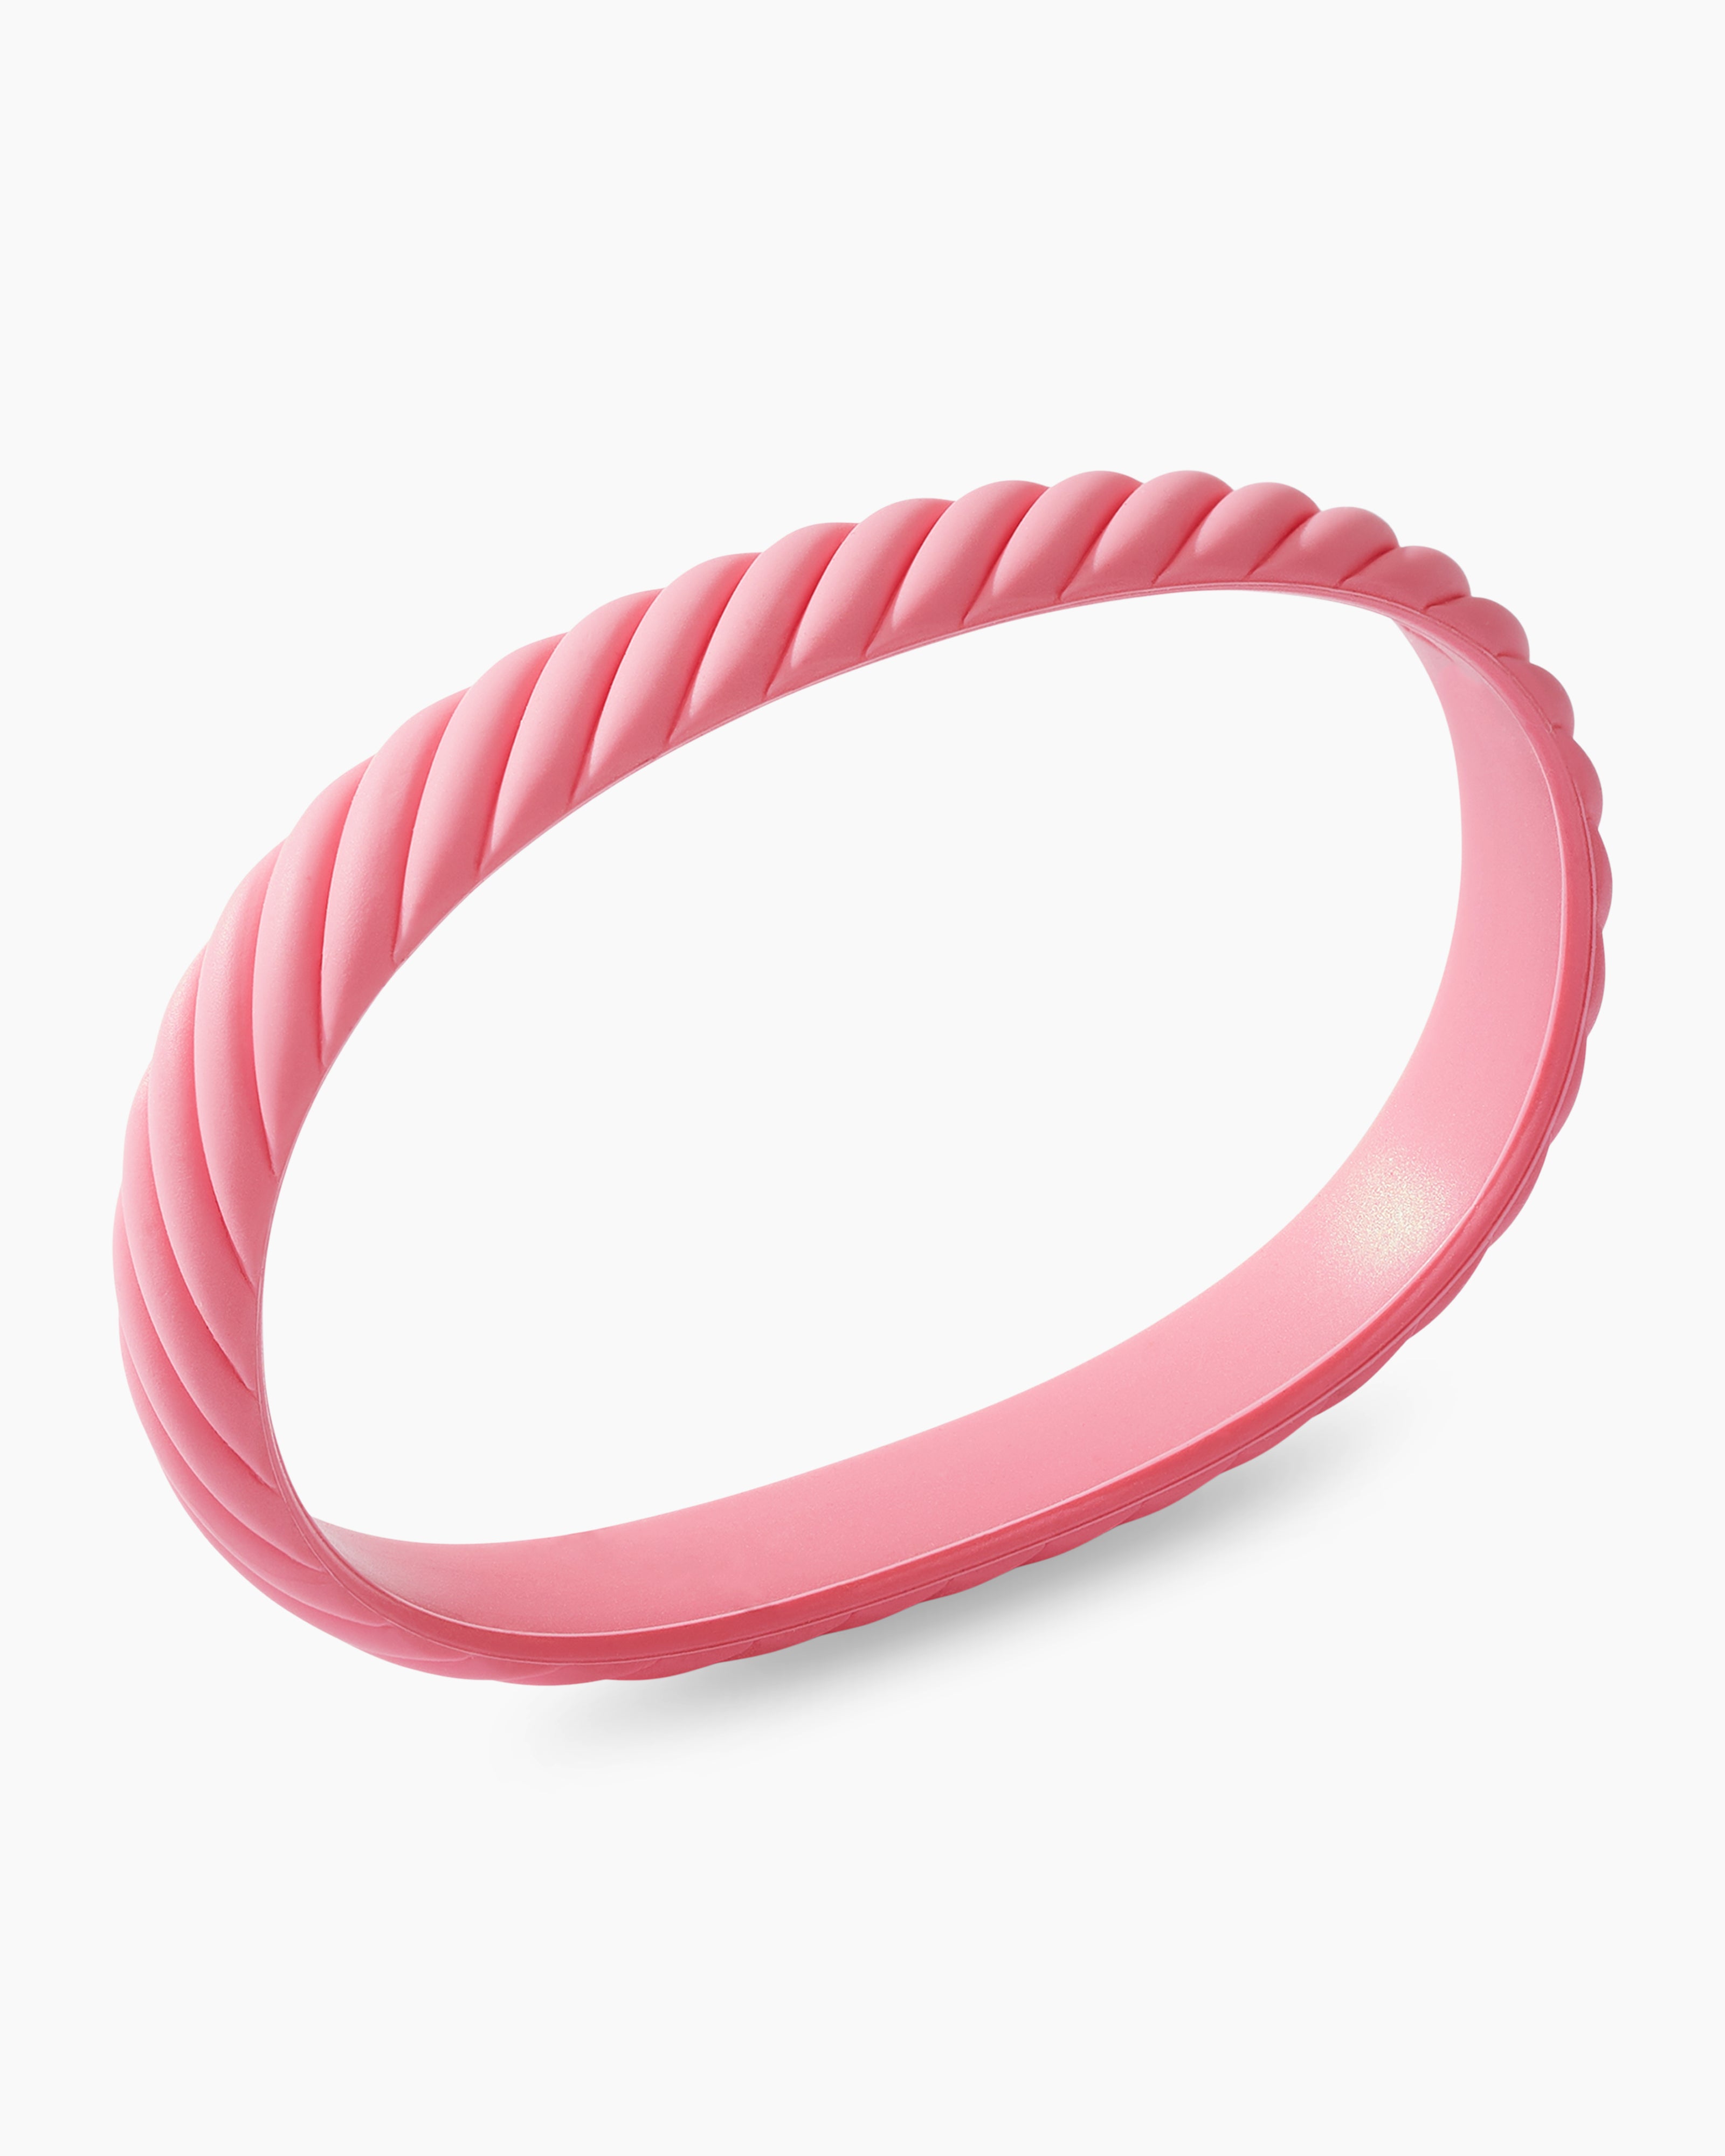 Zumba Moves Rubber Bracelets 8 pack! Party In Pink ~ PIP! Free Shipping! |  eBay